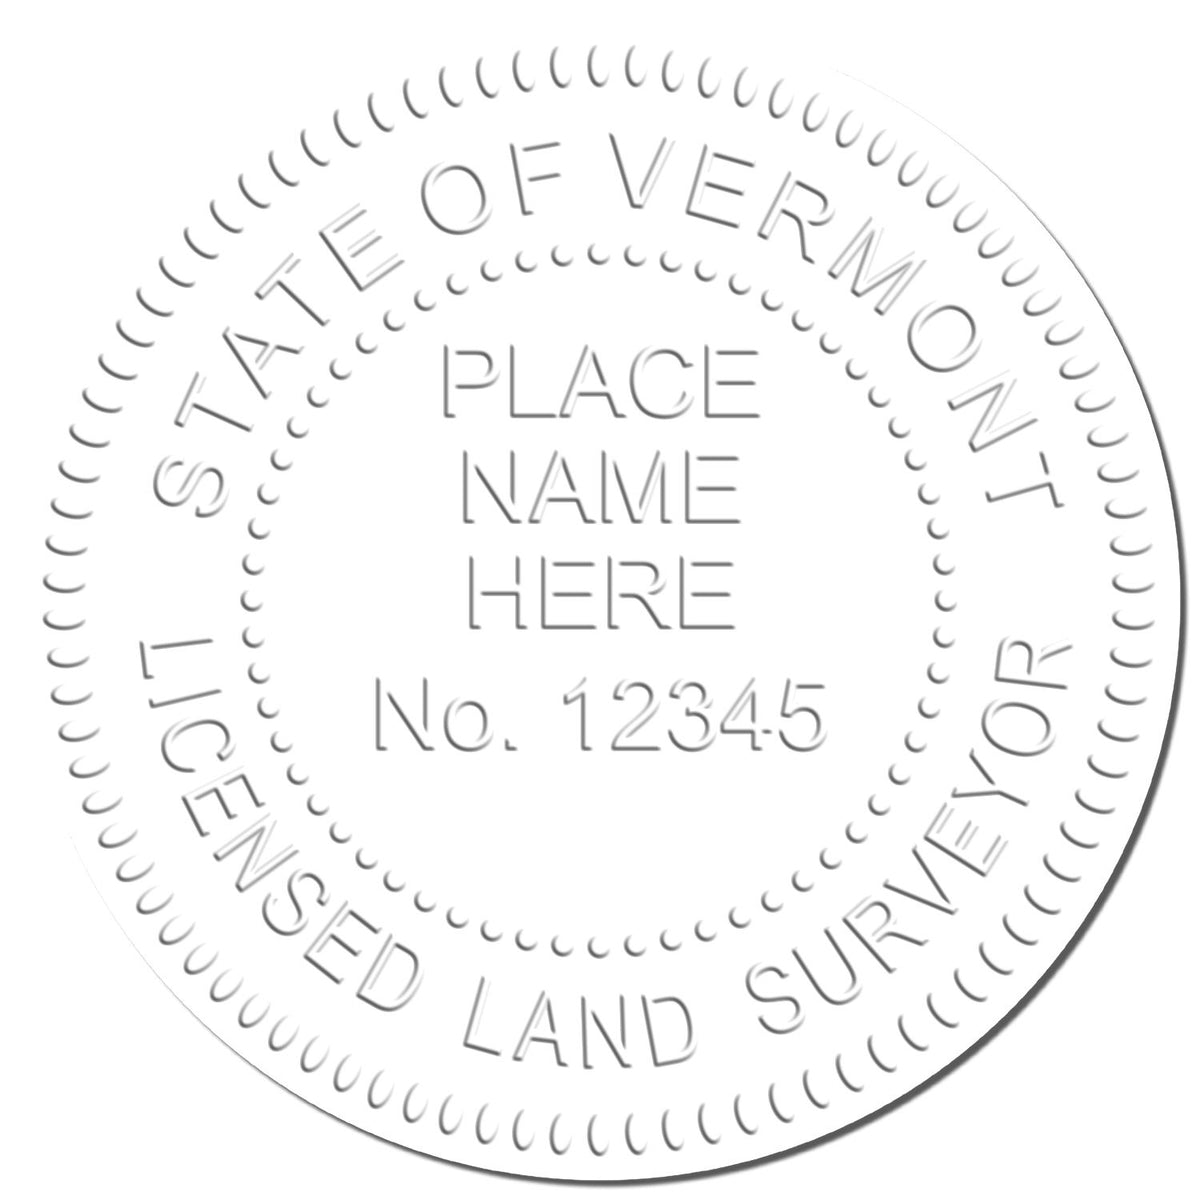 This paper is stamped with a sample imprint of the Hybrid Vermont Land Surveyor Seal, signifying its quality and reliability.